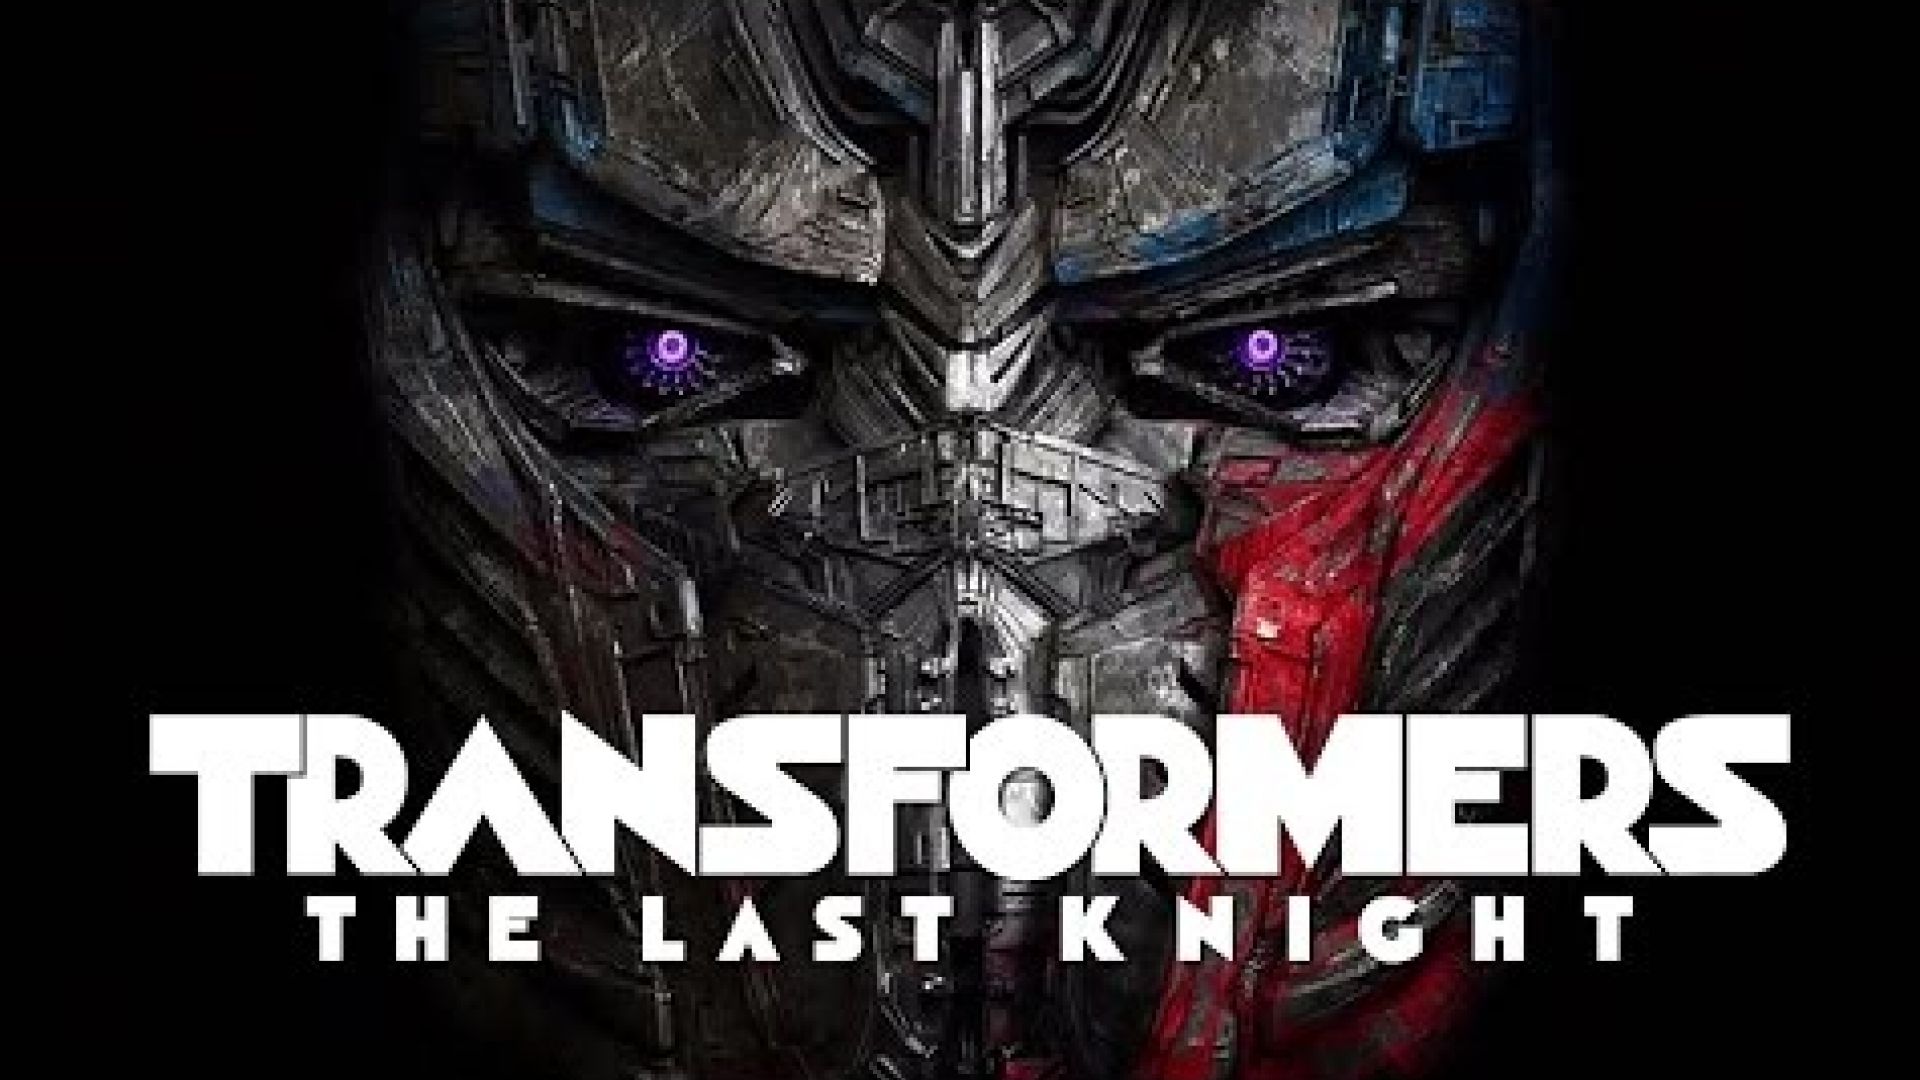 New trailer for &#039;Transformers: The Last Knight&#039;.